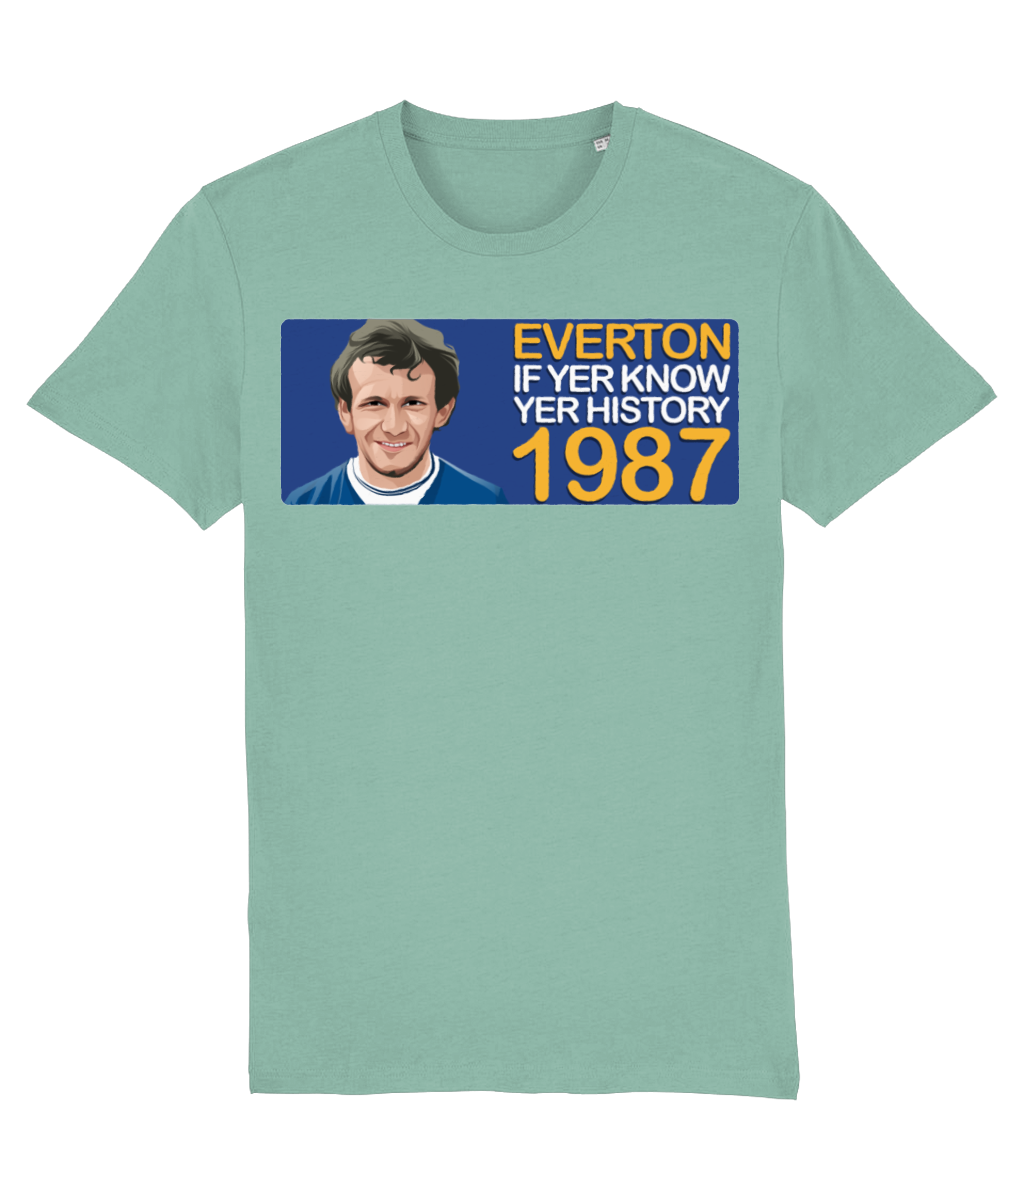 Everton 1987 Peter Reid If Yer Know Yer History Unisex T-Shirt Stanley/Stella Retrotext Mid Heather Green XX-Small 